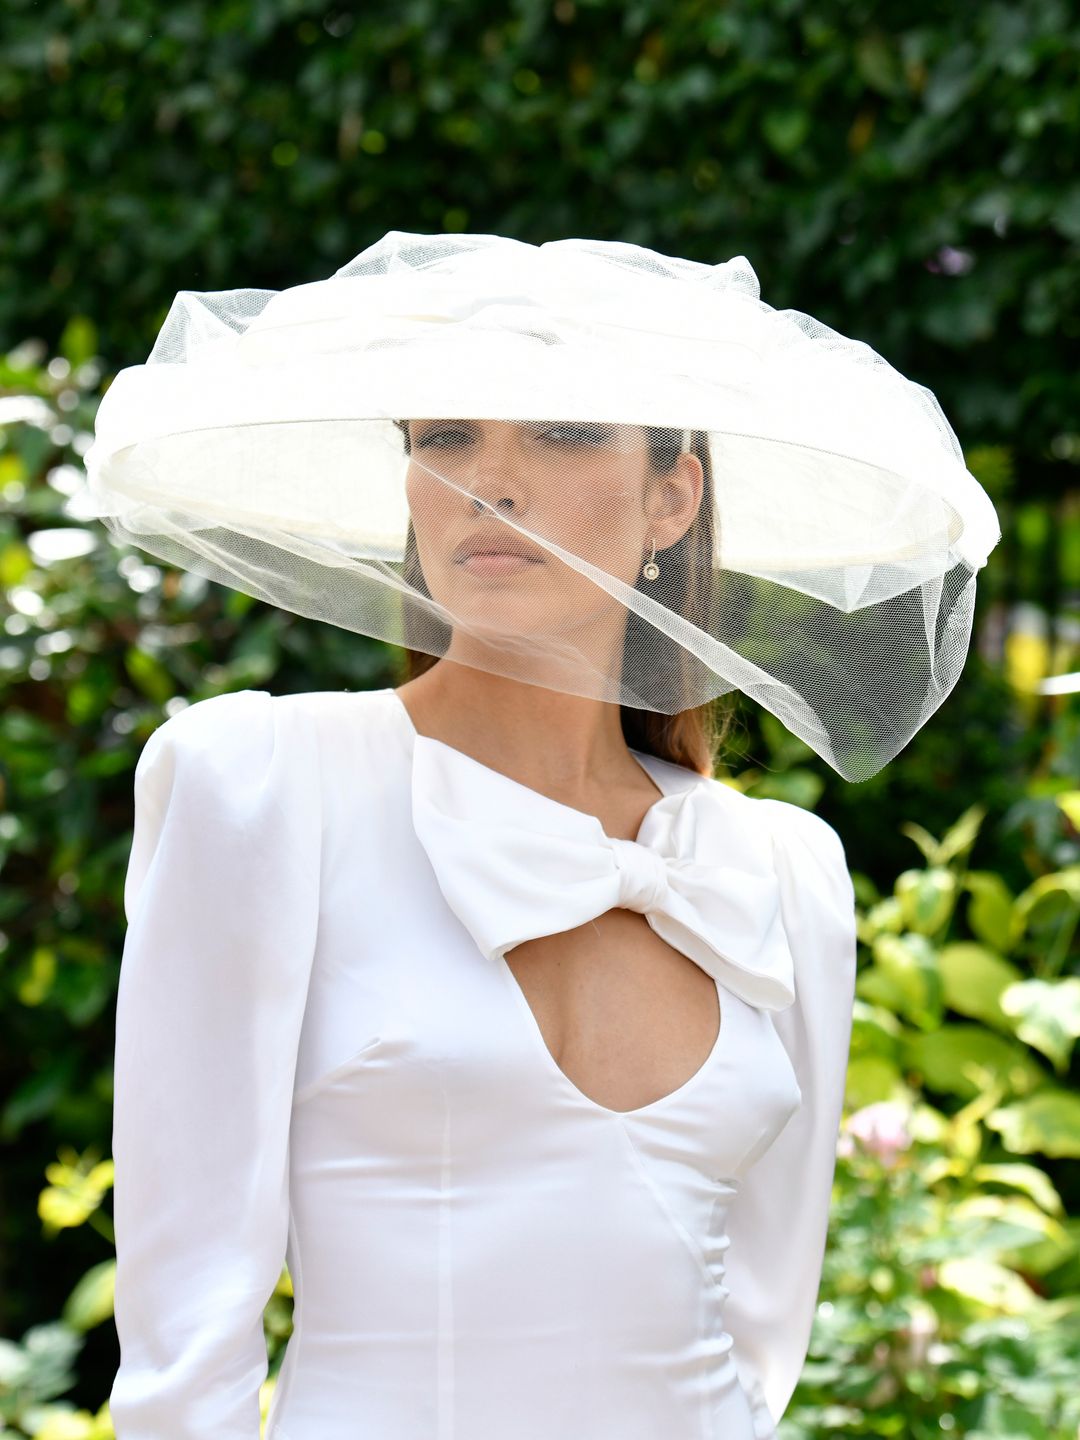 ASCOT, ENGLAND - JUNE 20: Hana Cross attends day one of Royal Ascot 2023 at Ascot Racecourse on June 20, 2023 in Ascot, England. (Photo by Kirstin Sinclair/Getty Images for Royal Ascot)